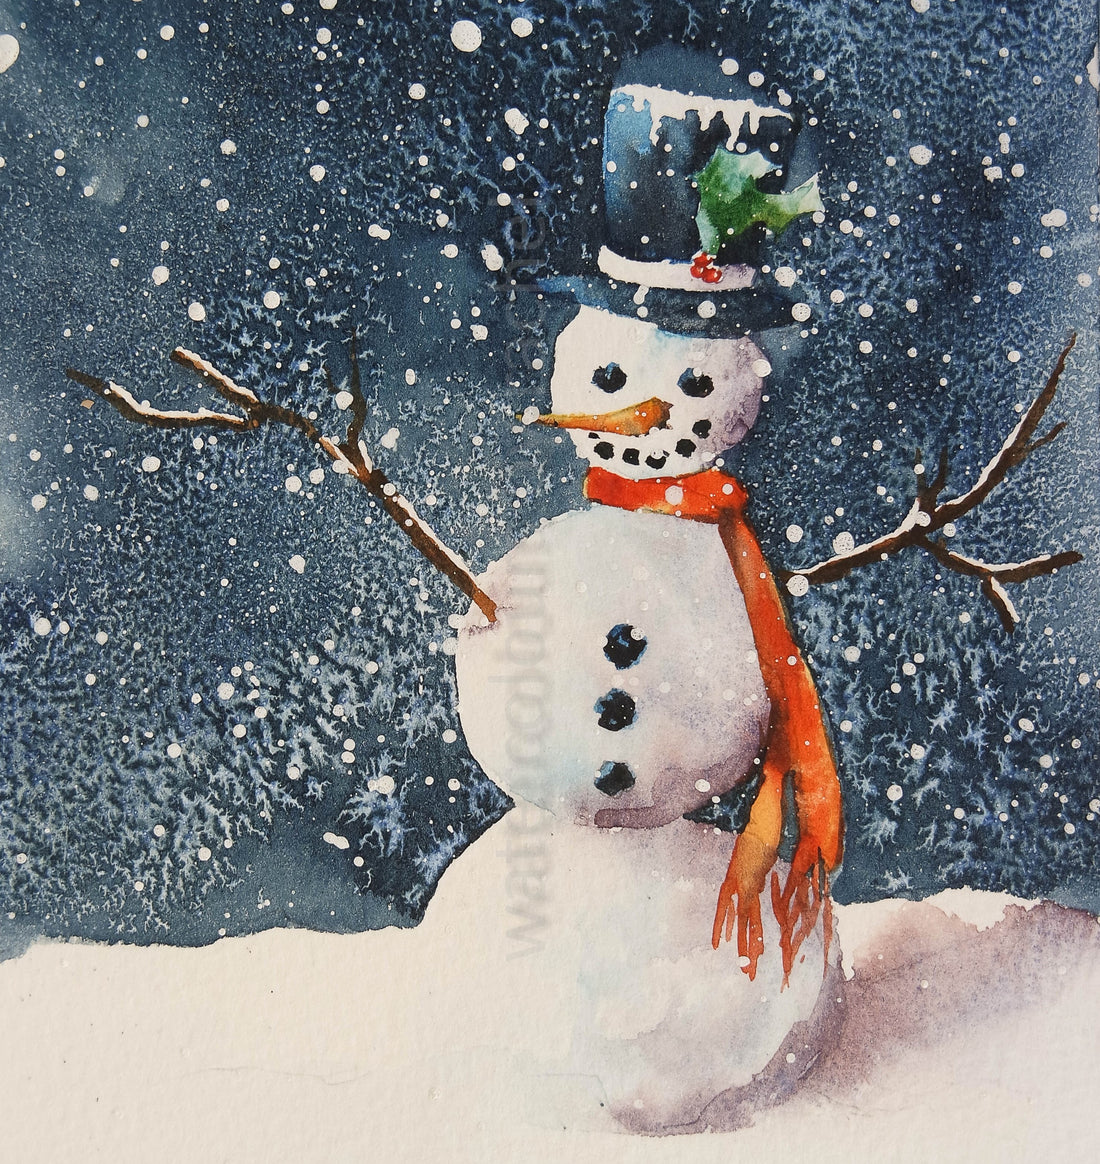 'Do you want to paint a snowman?'